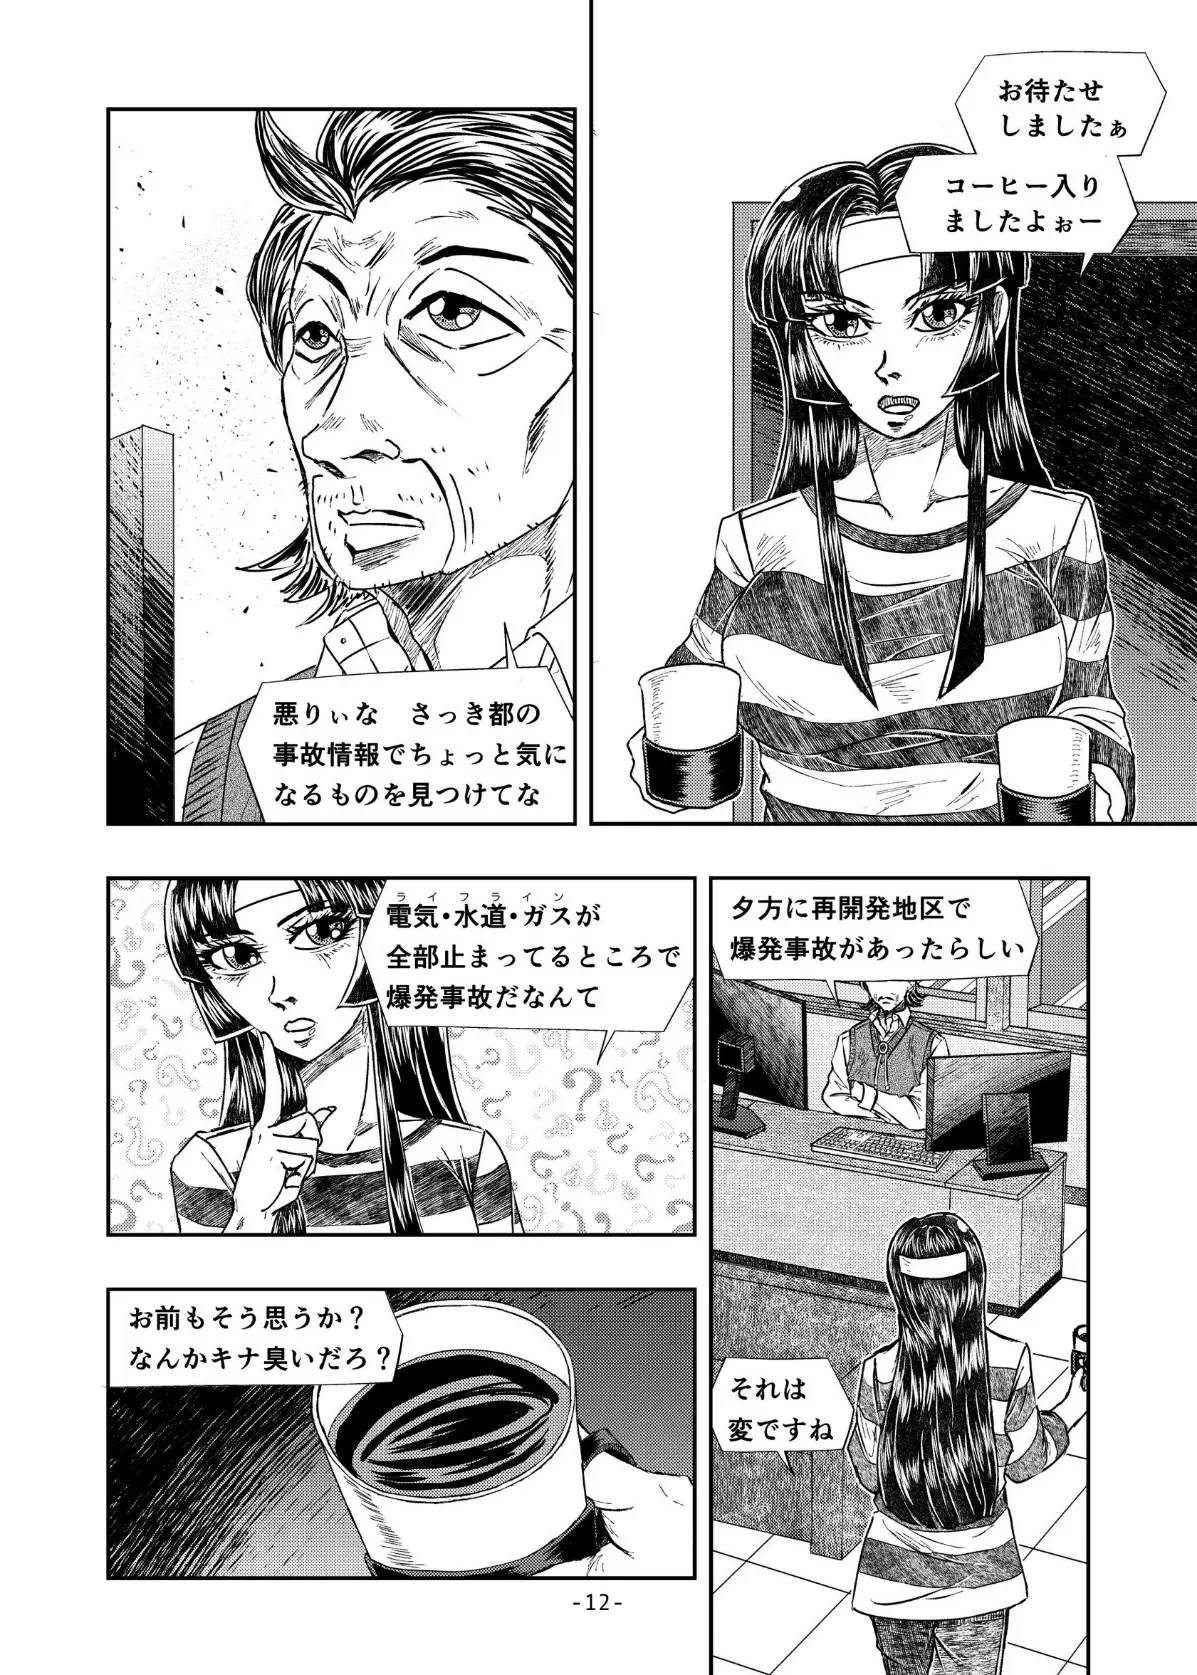 XENON REBOOT＜BASED STORY ON ’BIO DIVER XENON’＞【分冊版】 Chapter1 STRANGERS When We Meet（3） 12ページ